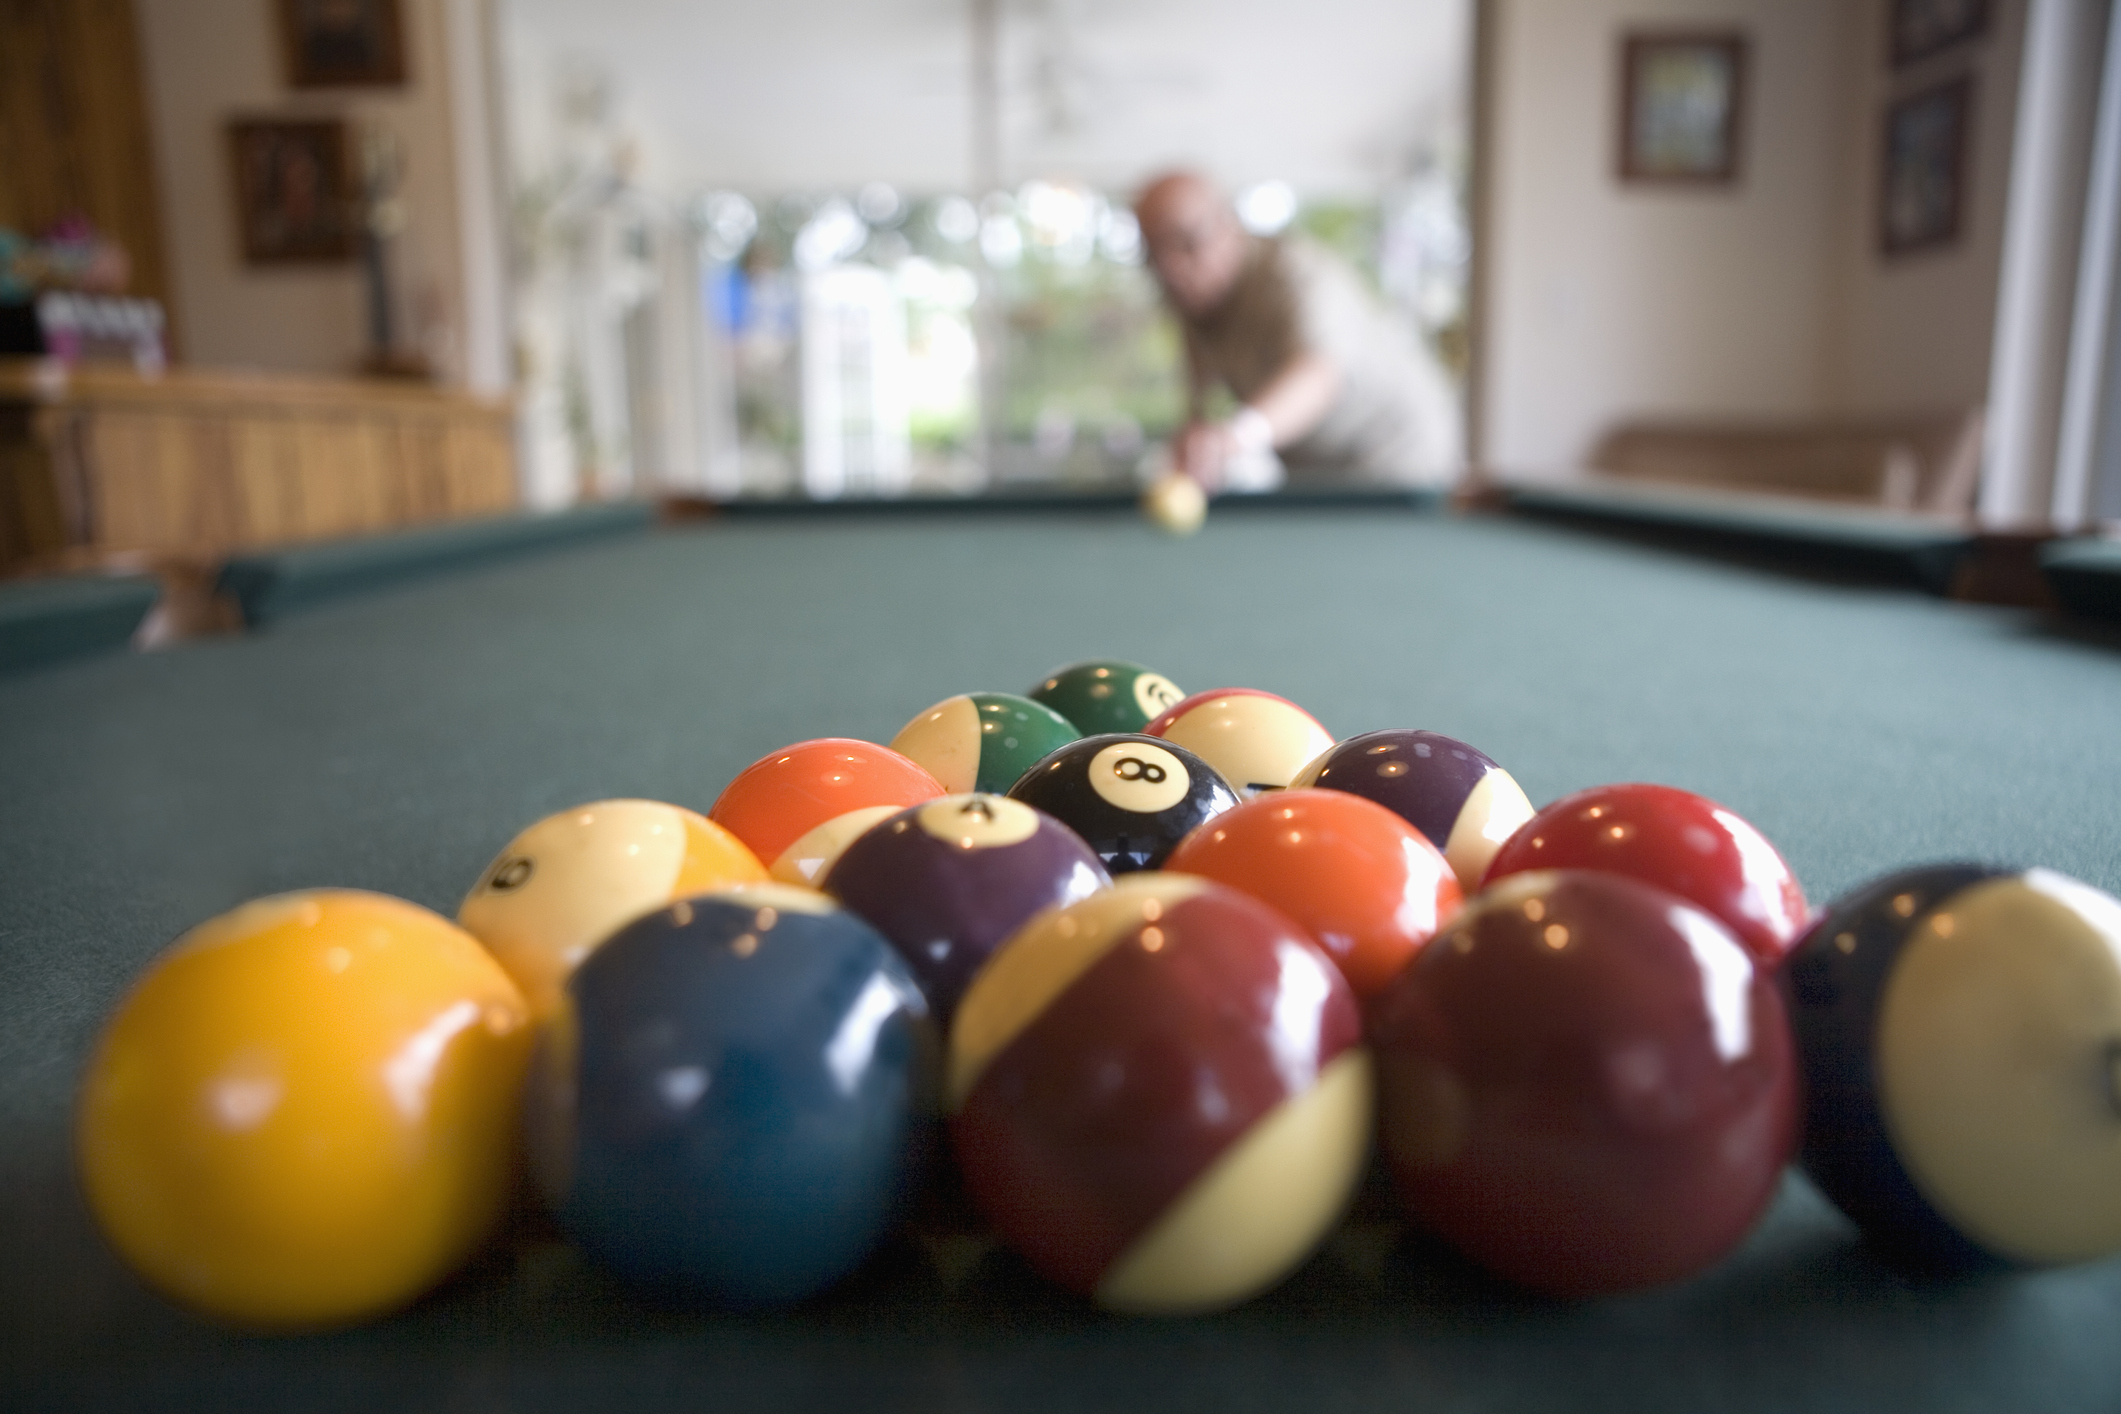 A man is playing billiards